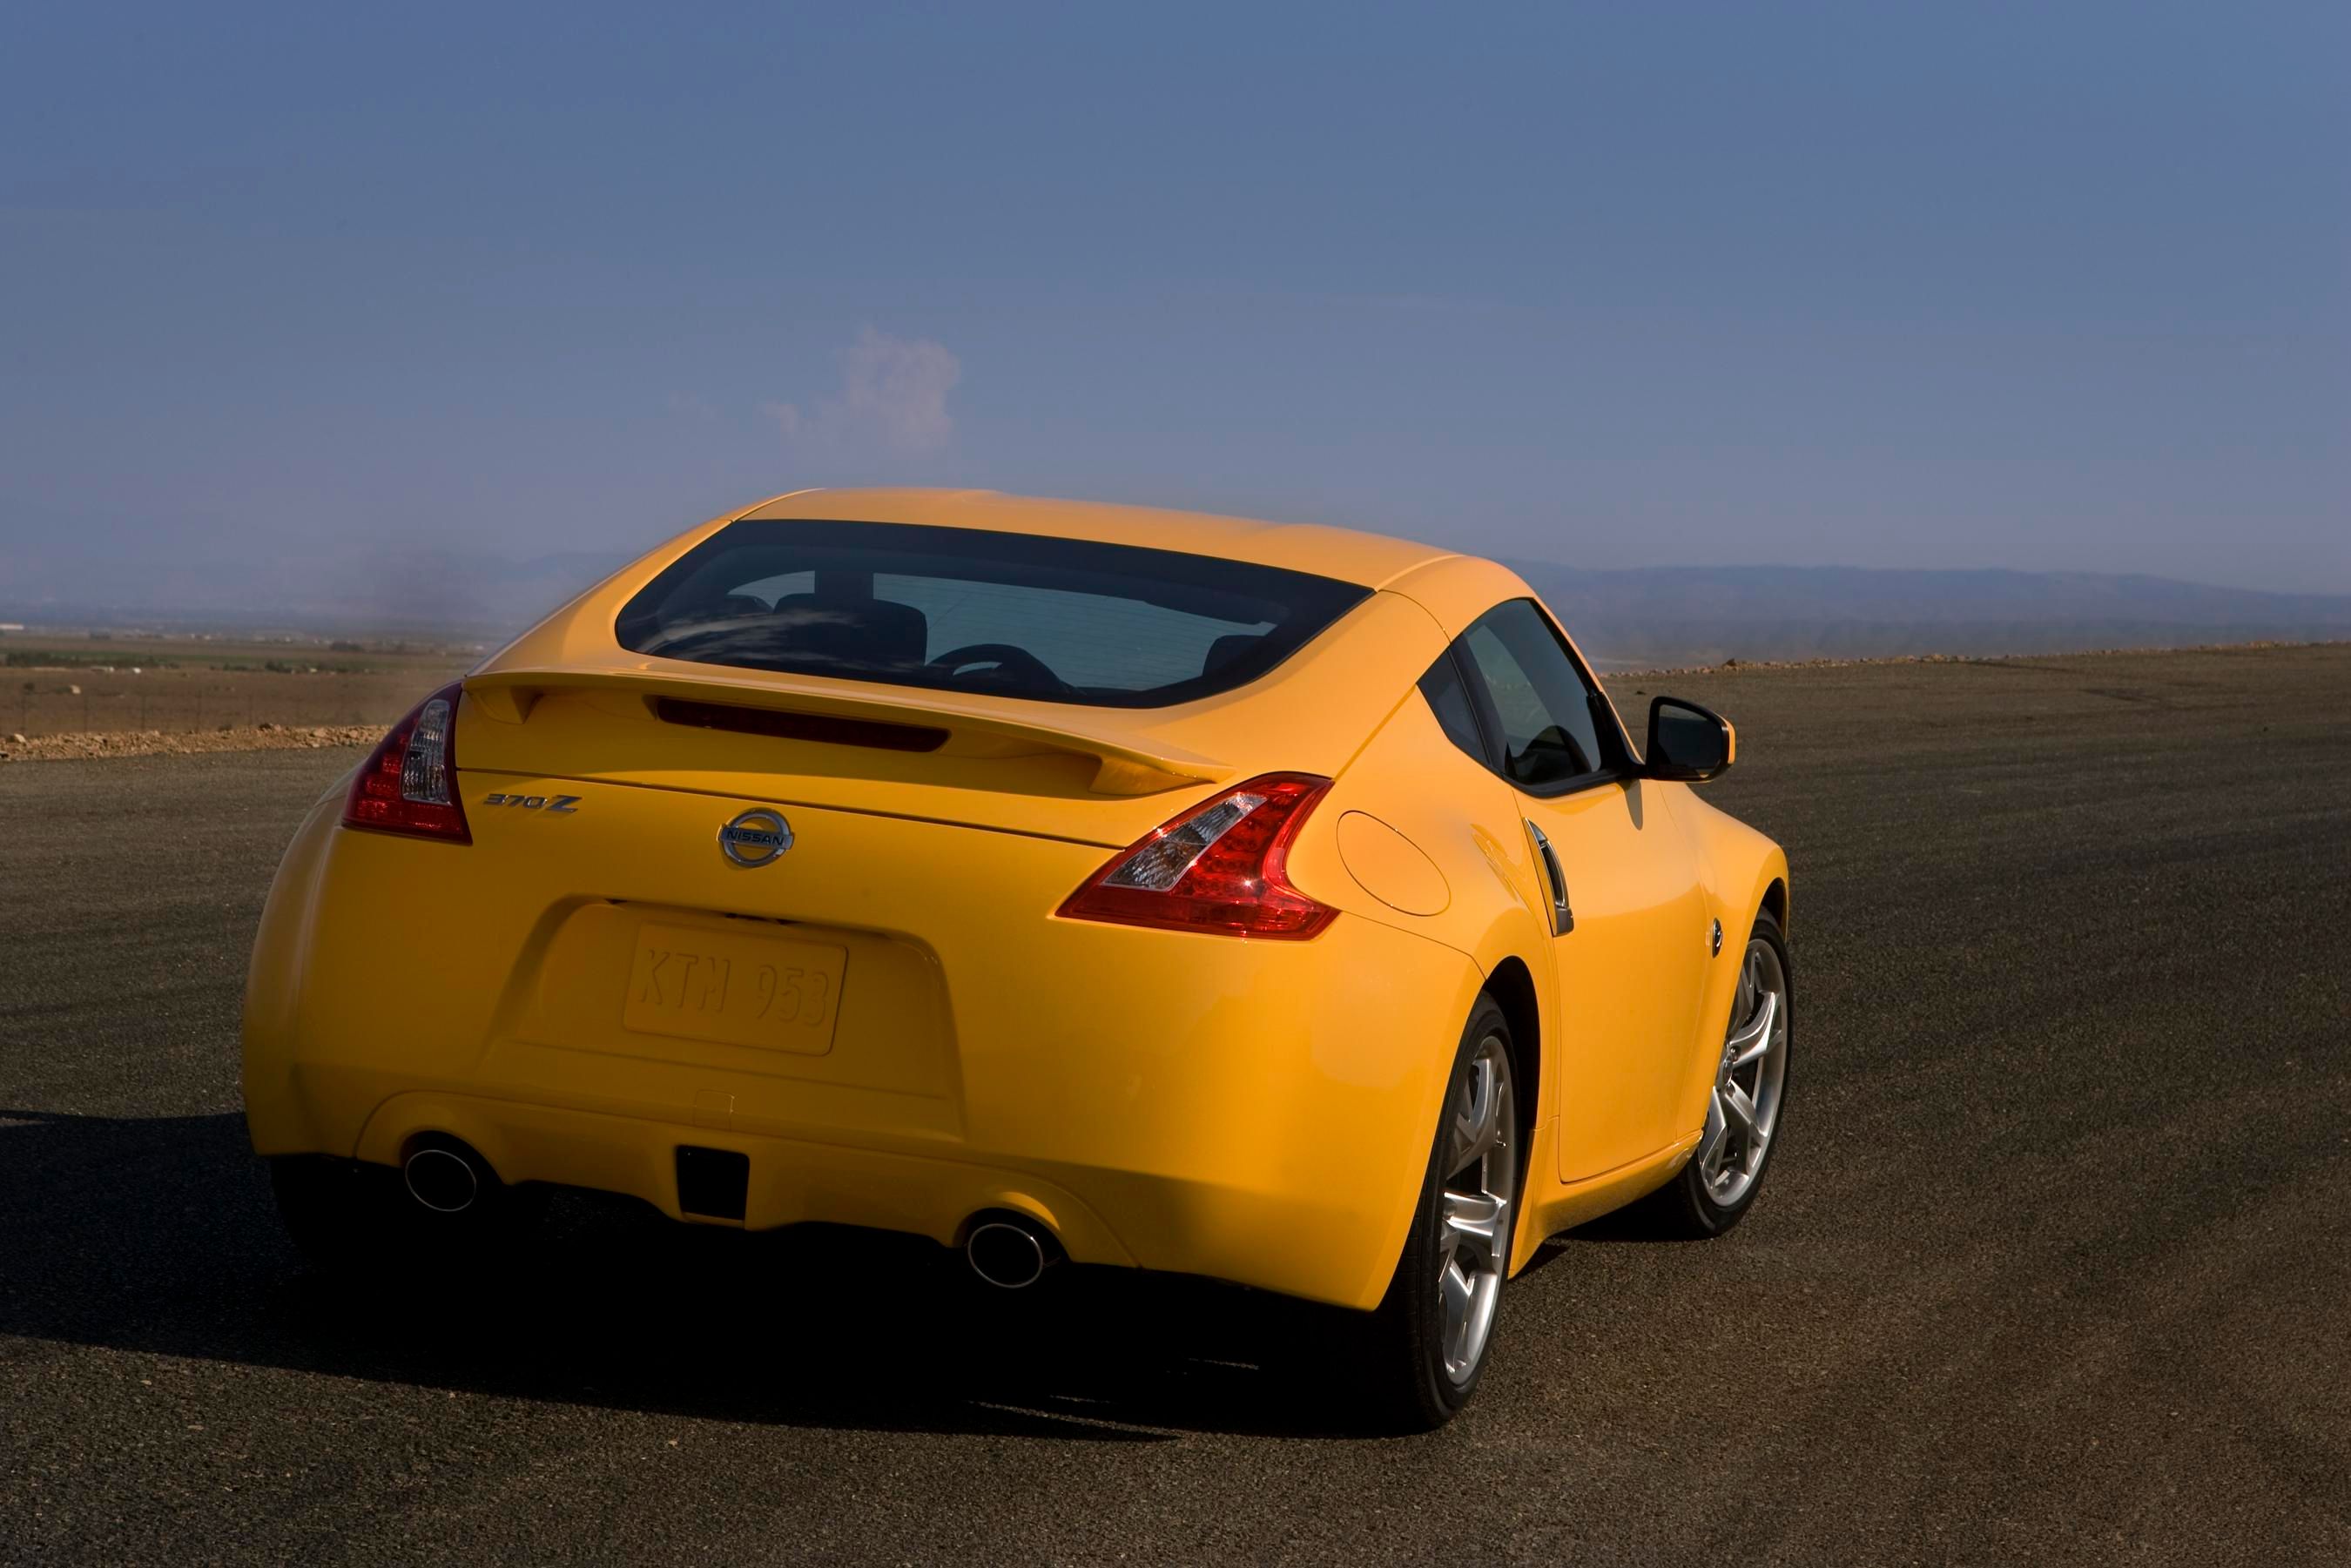 2010 Nissan 370Z Coupe